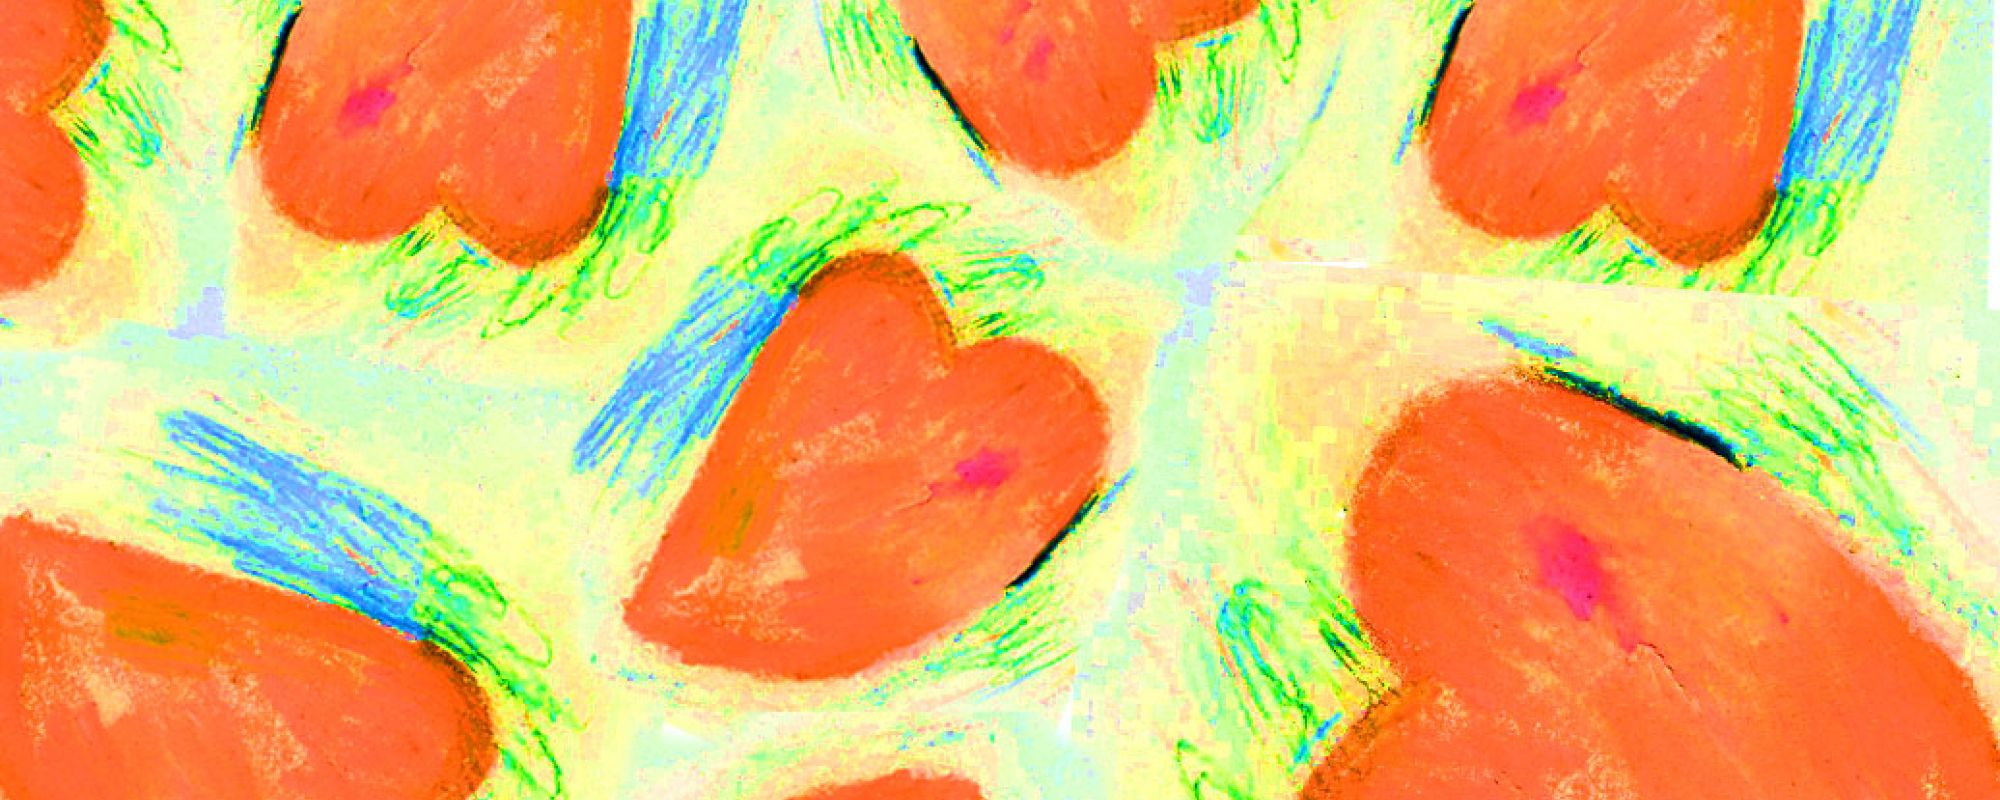 A hand-drawn photo of hearts on a yellow, blue, and green background.